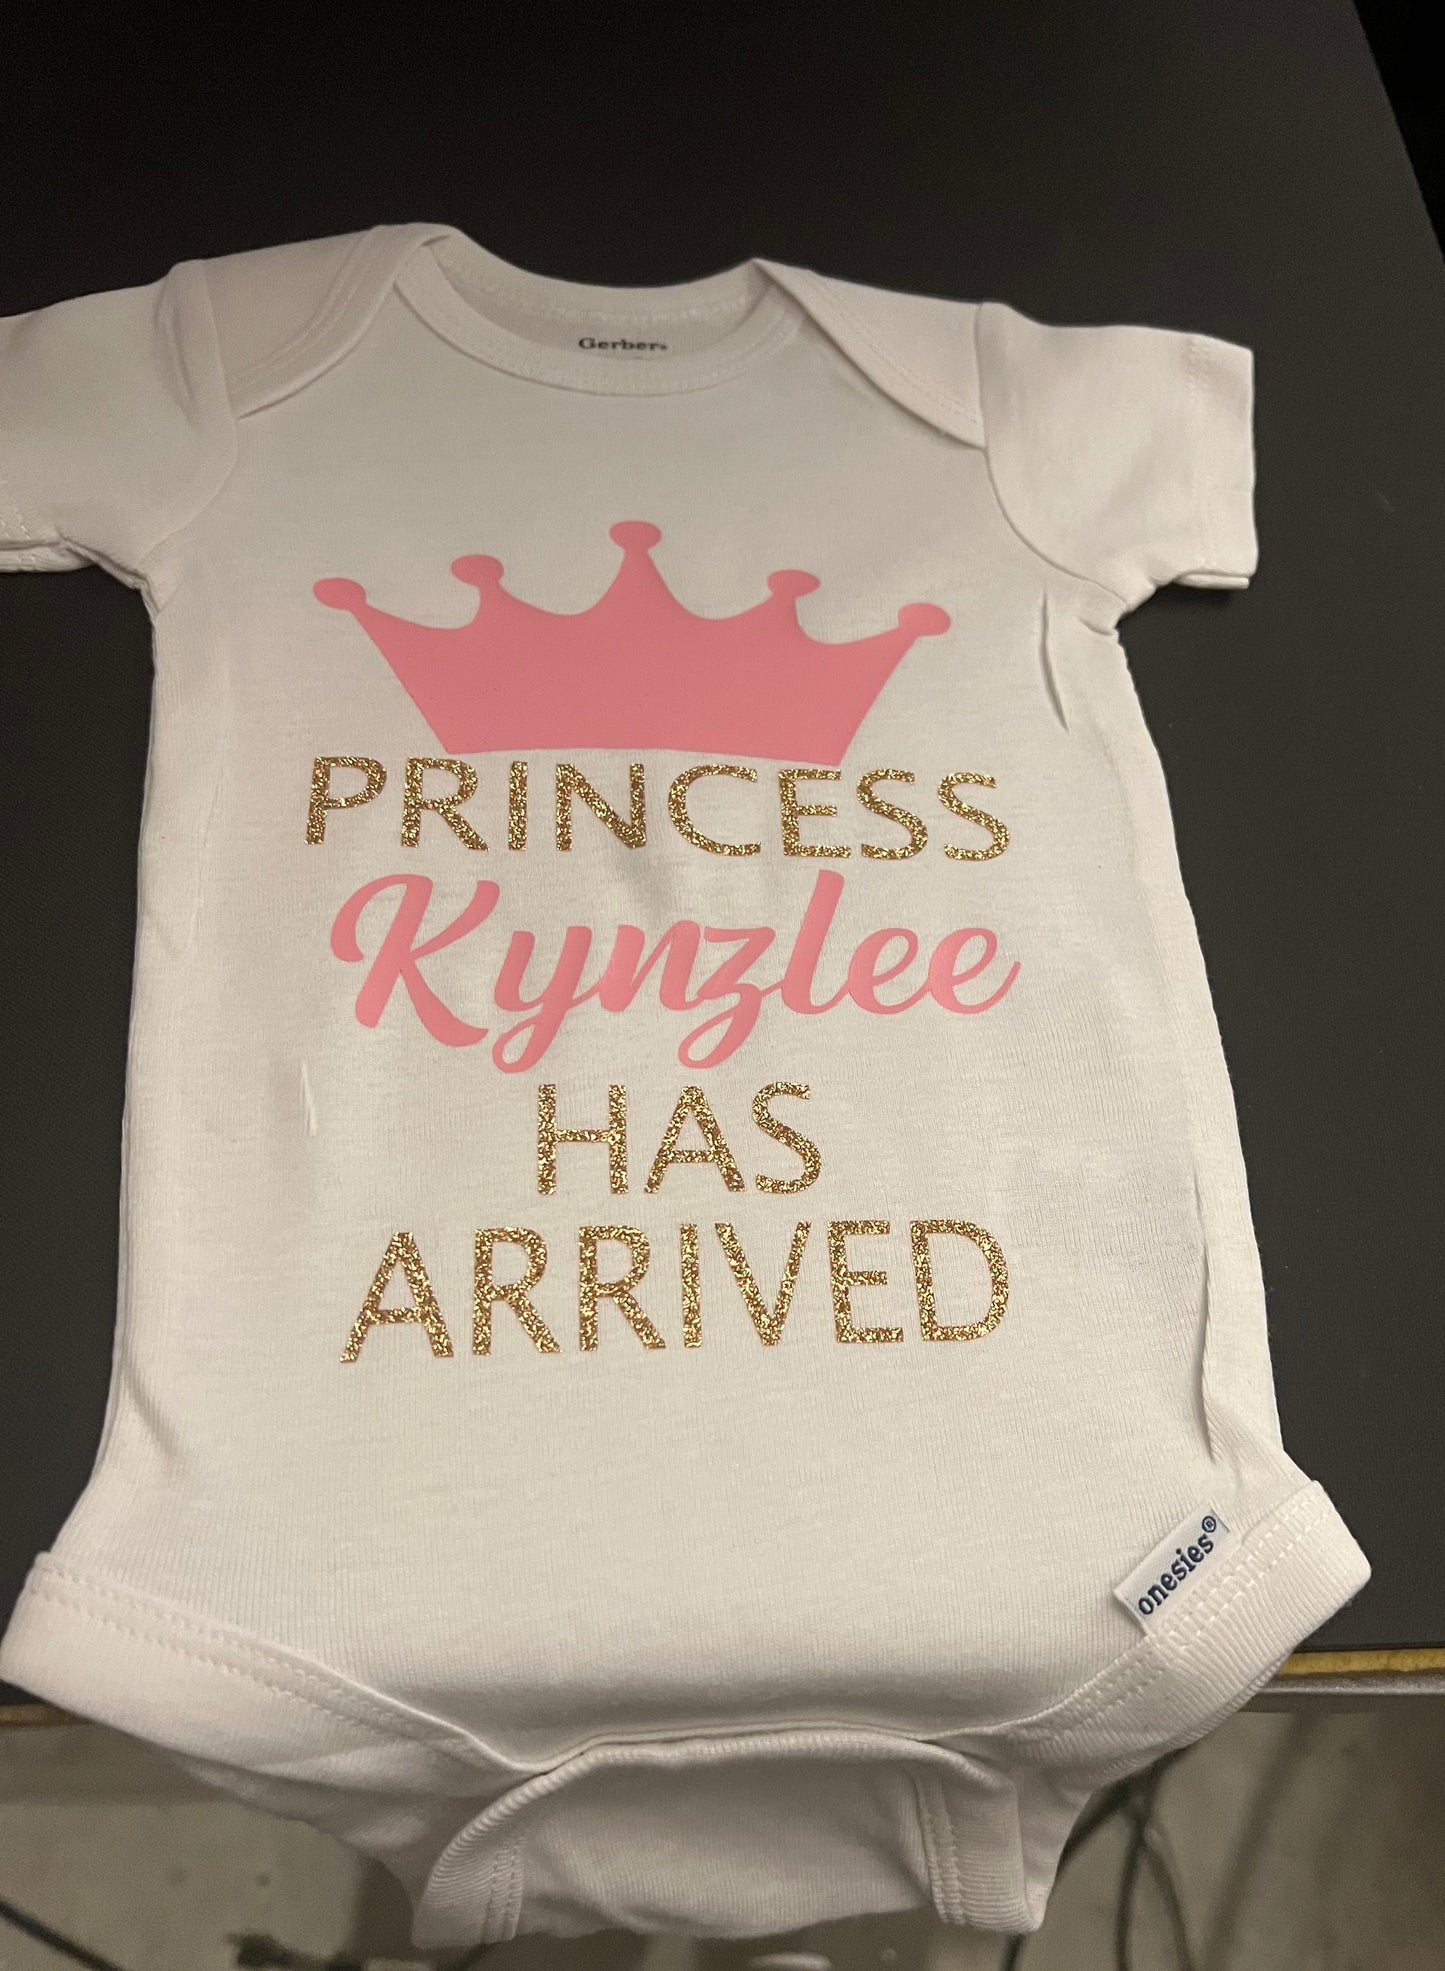 Personalized Infant Onesie